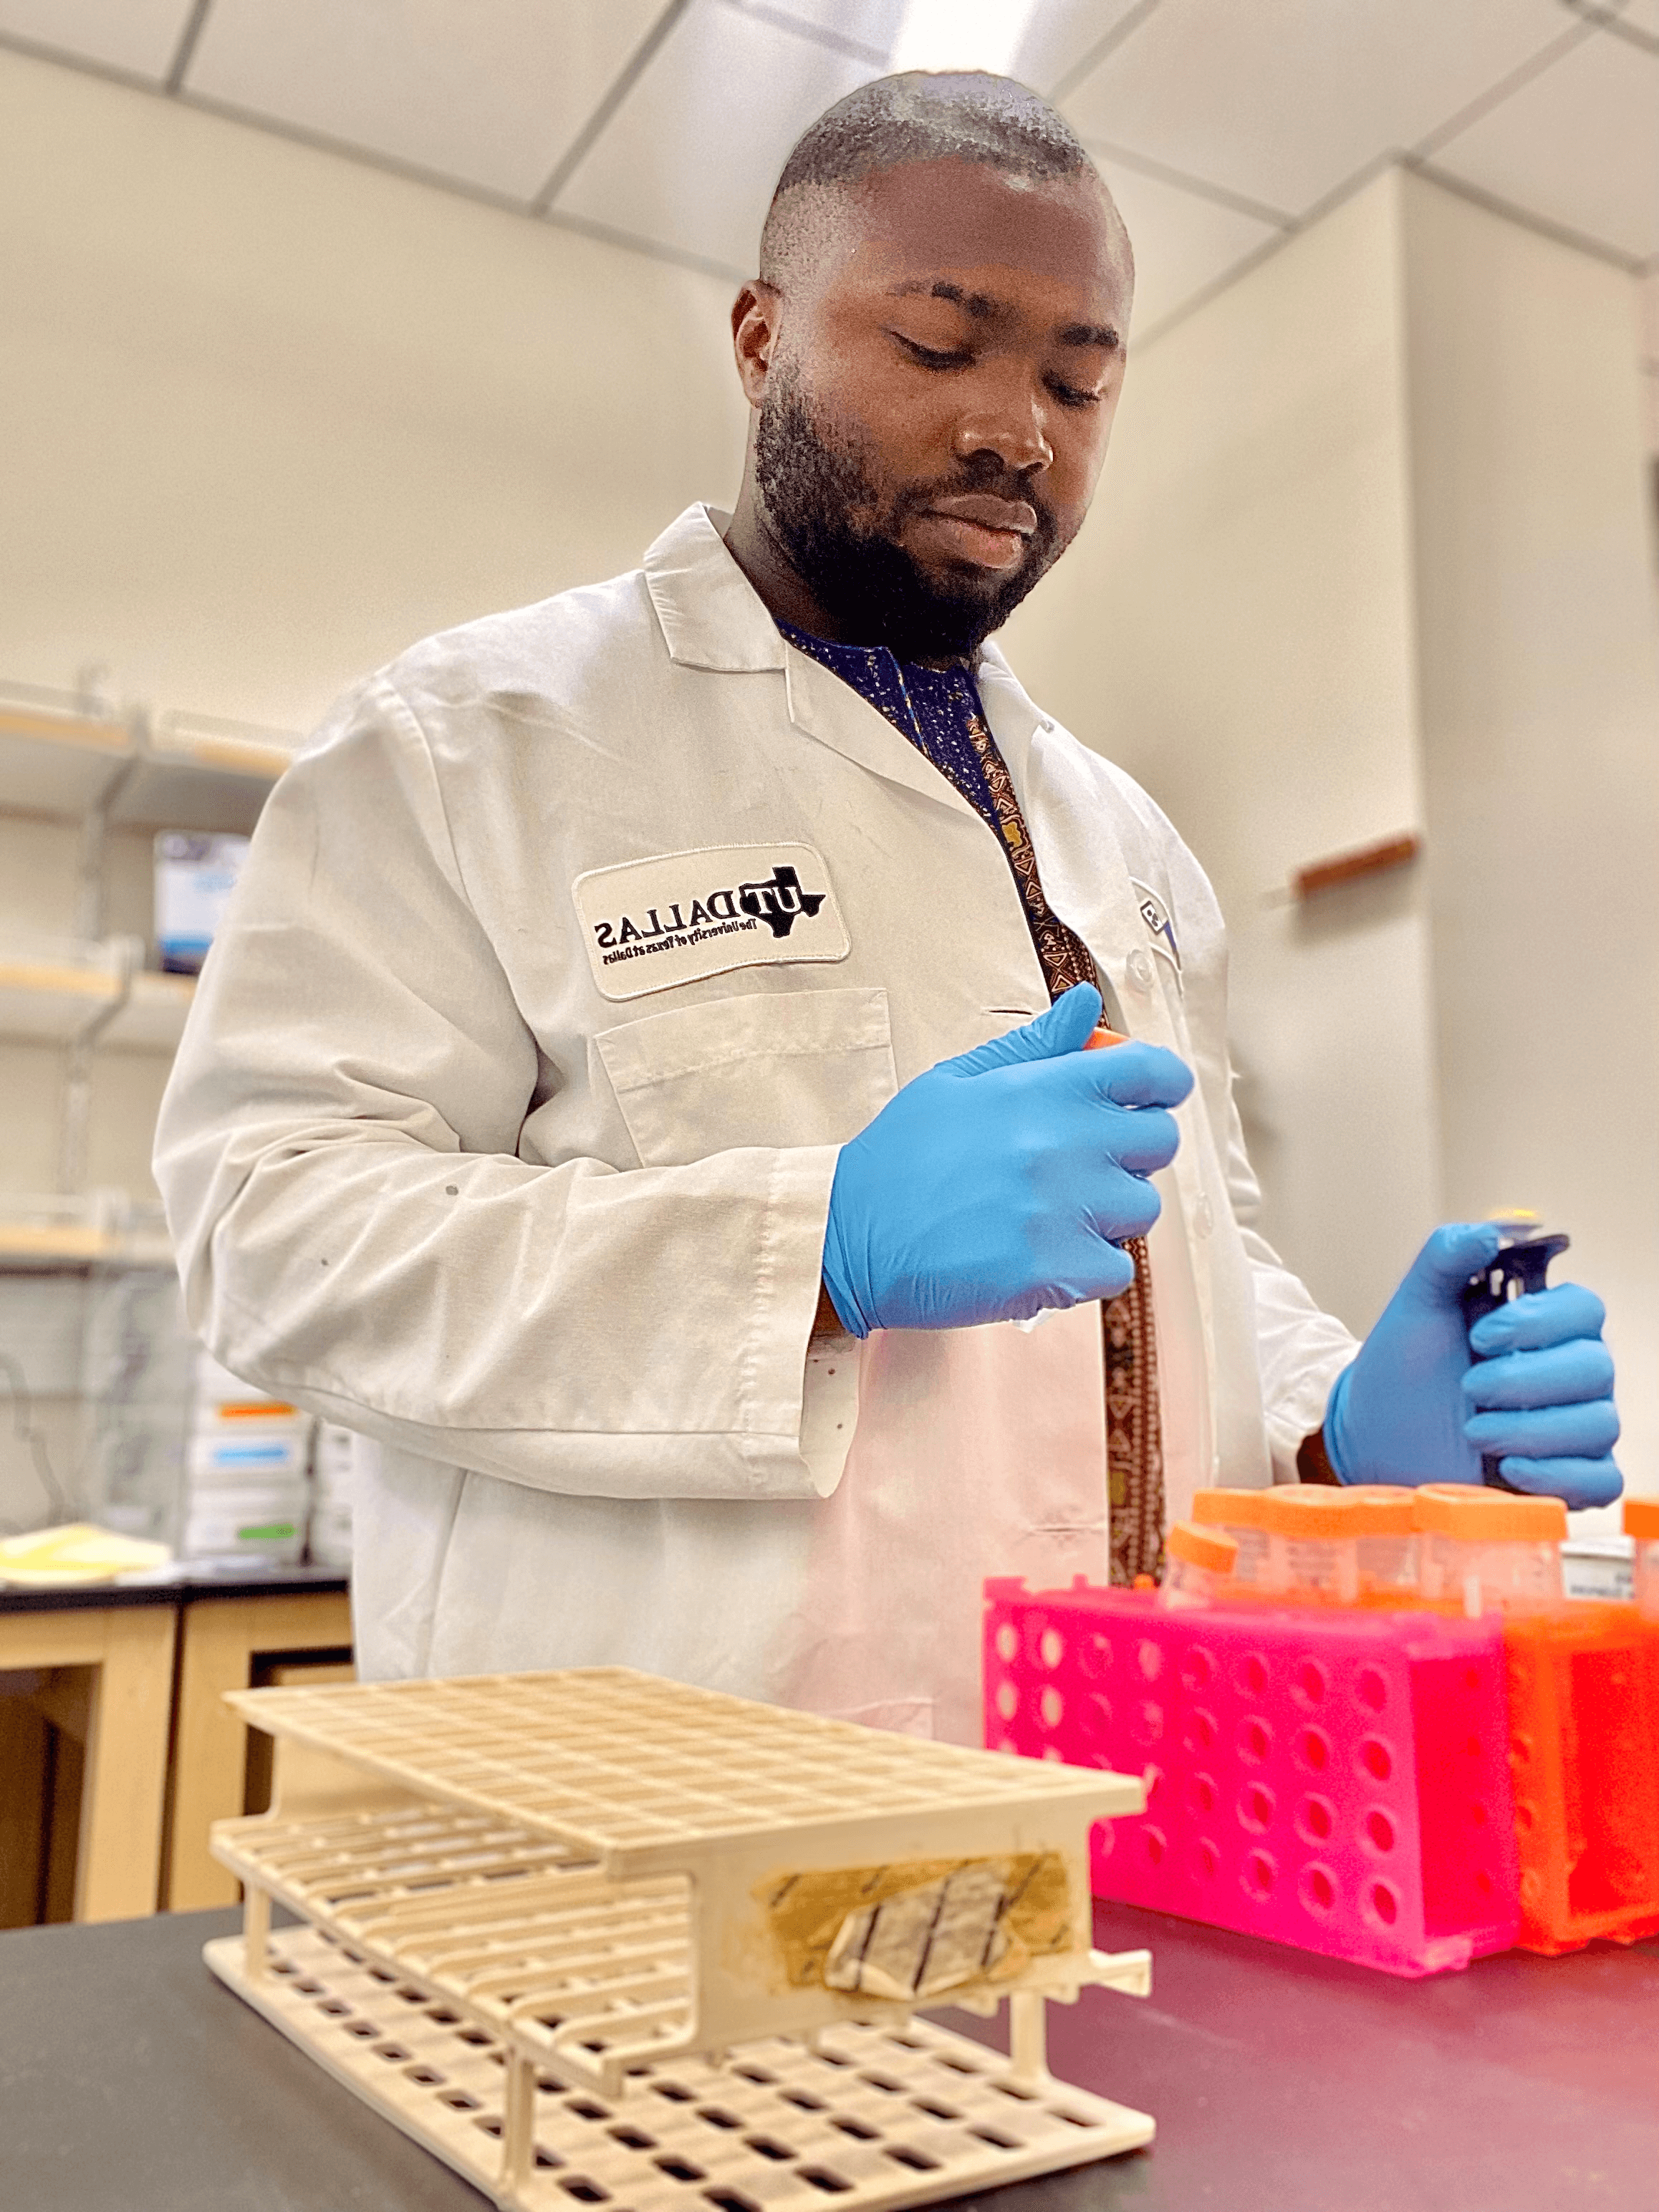 UT Dallas student Muneer Yaqub, a PhD student in the US doing lab work